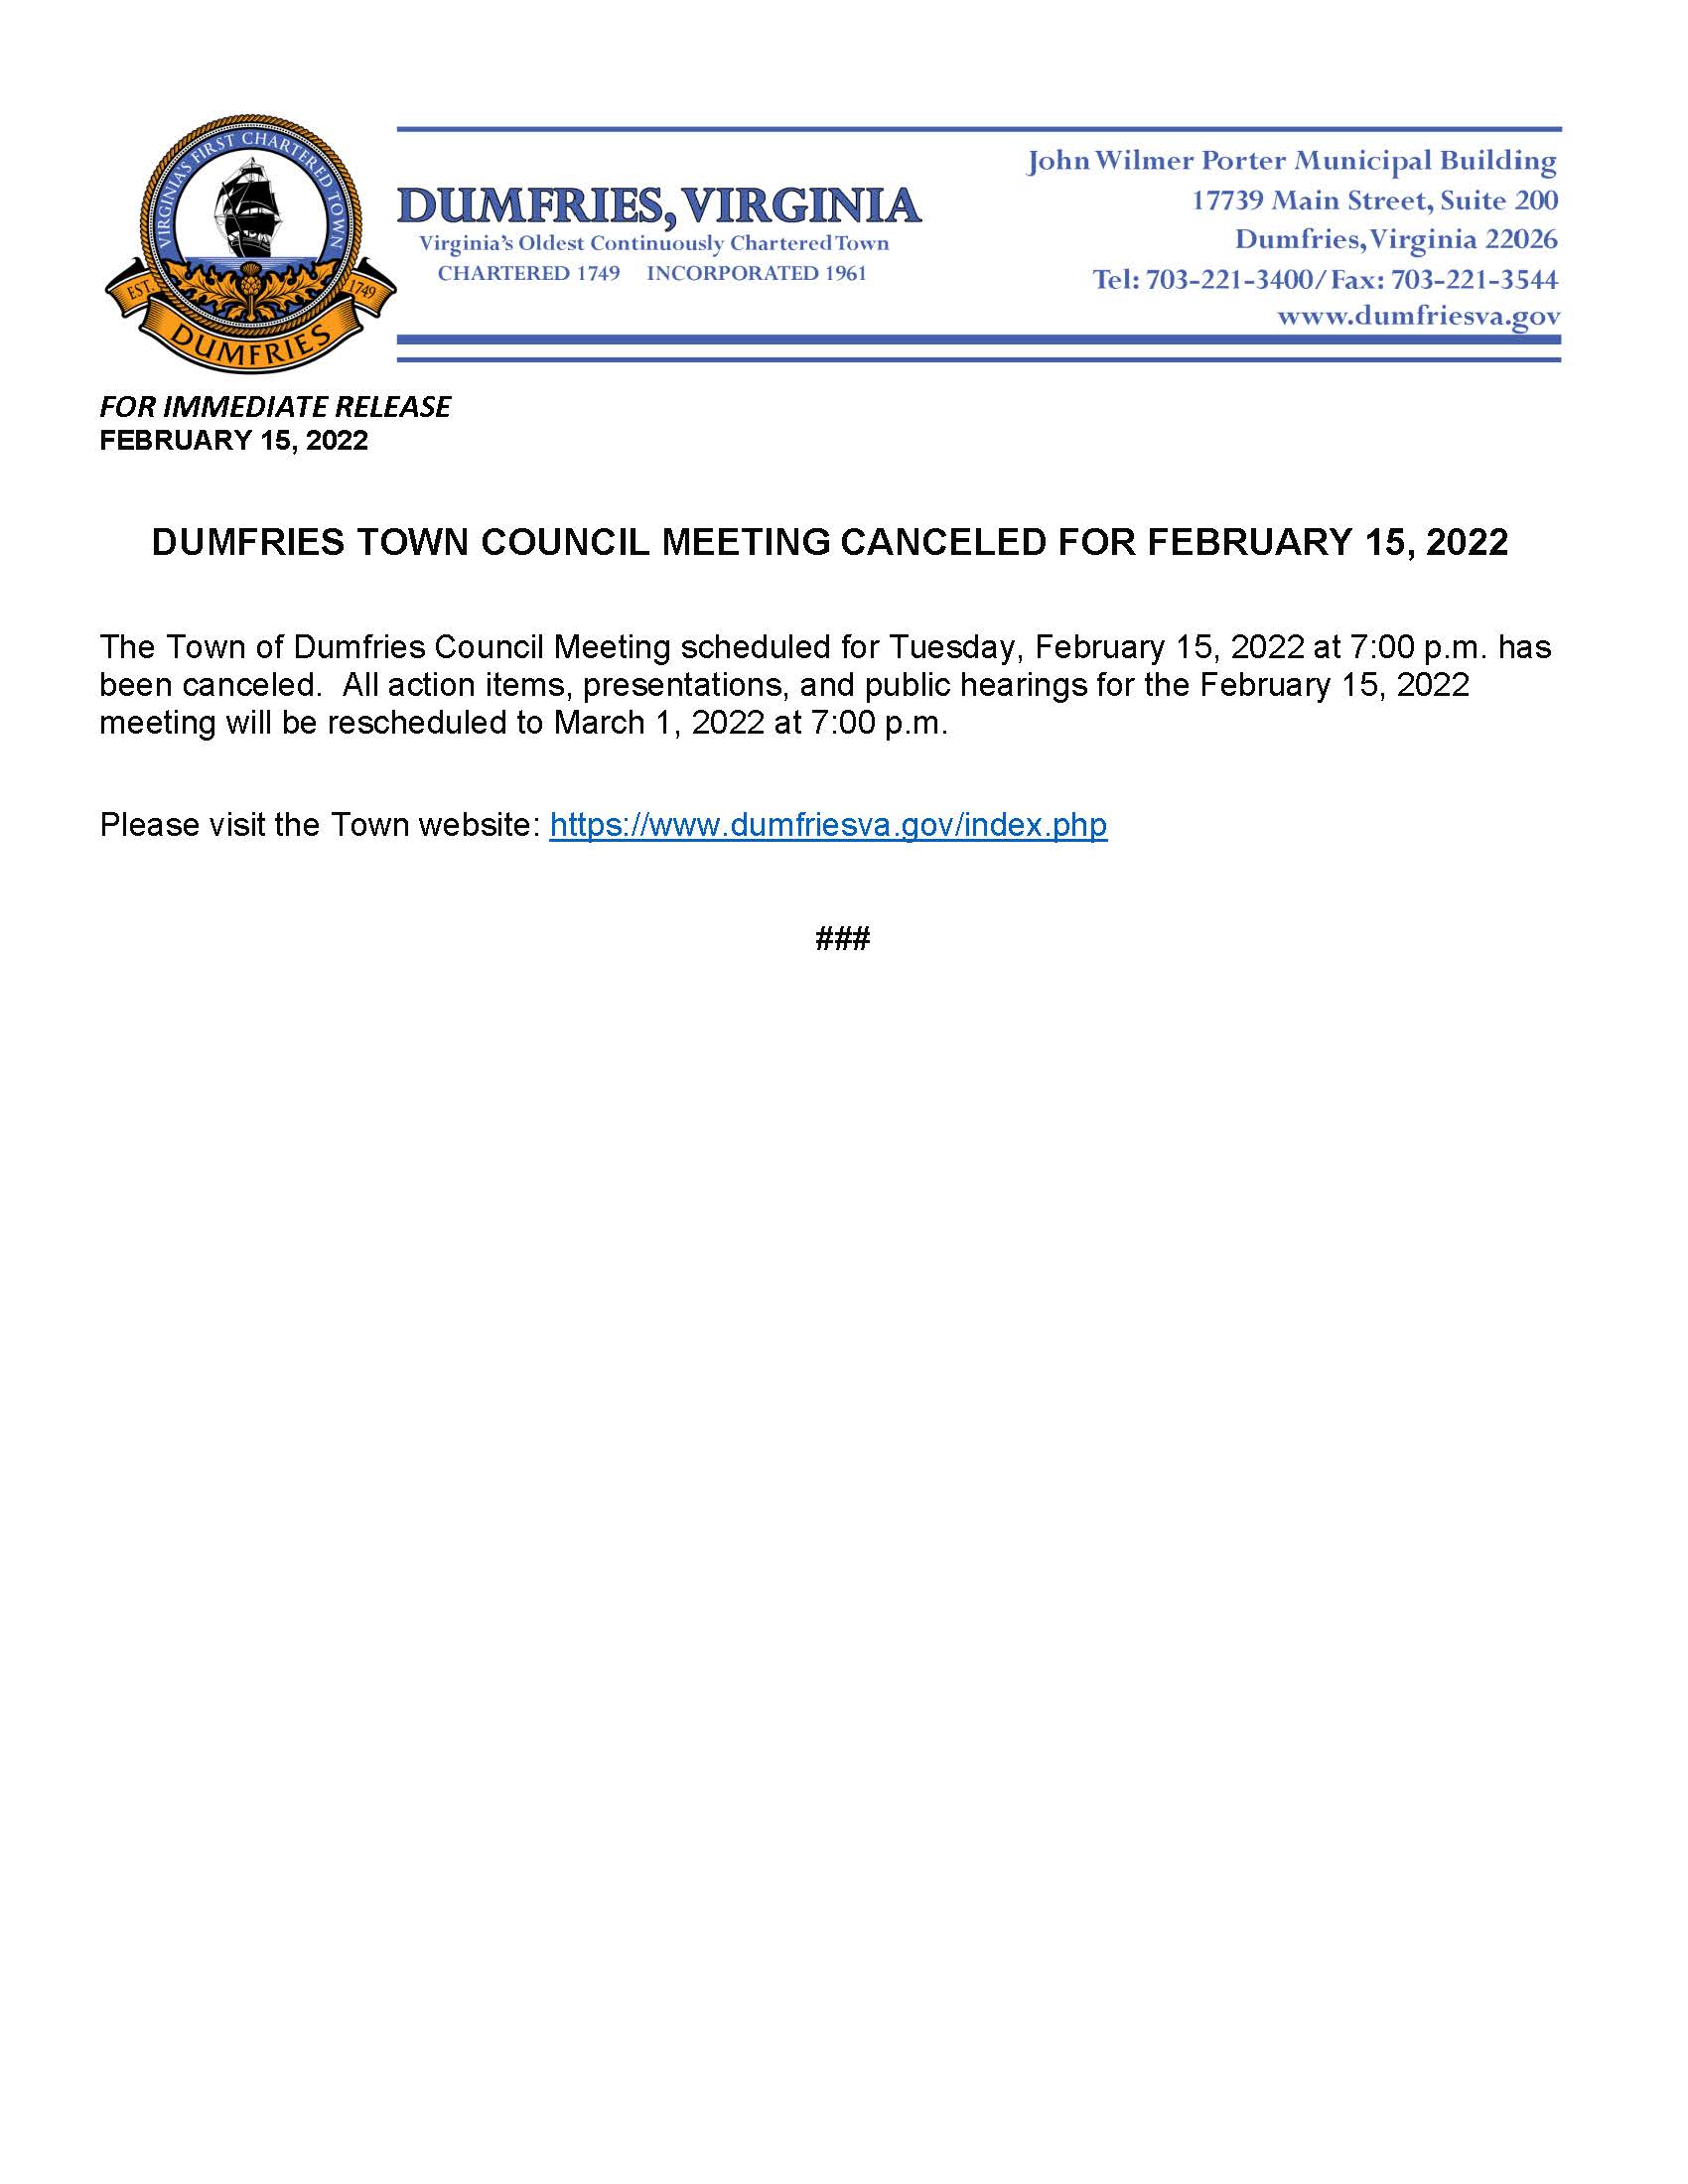 Town Council Meeting Canceled 02152022